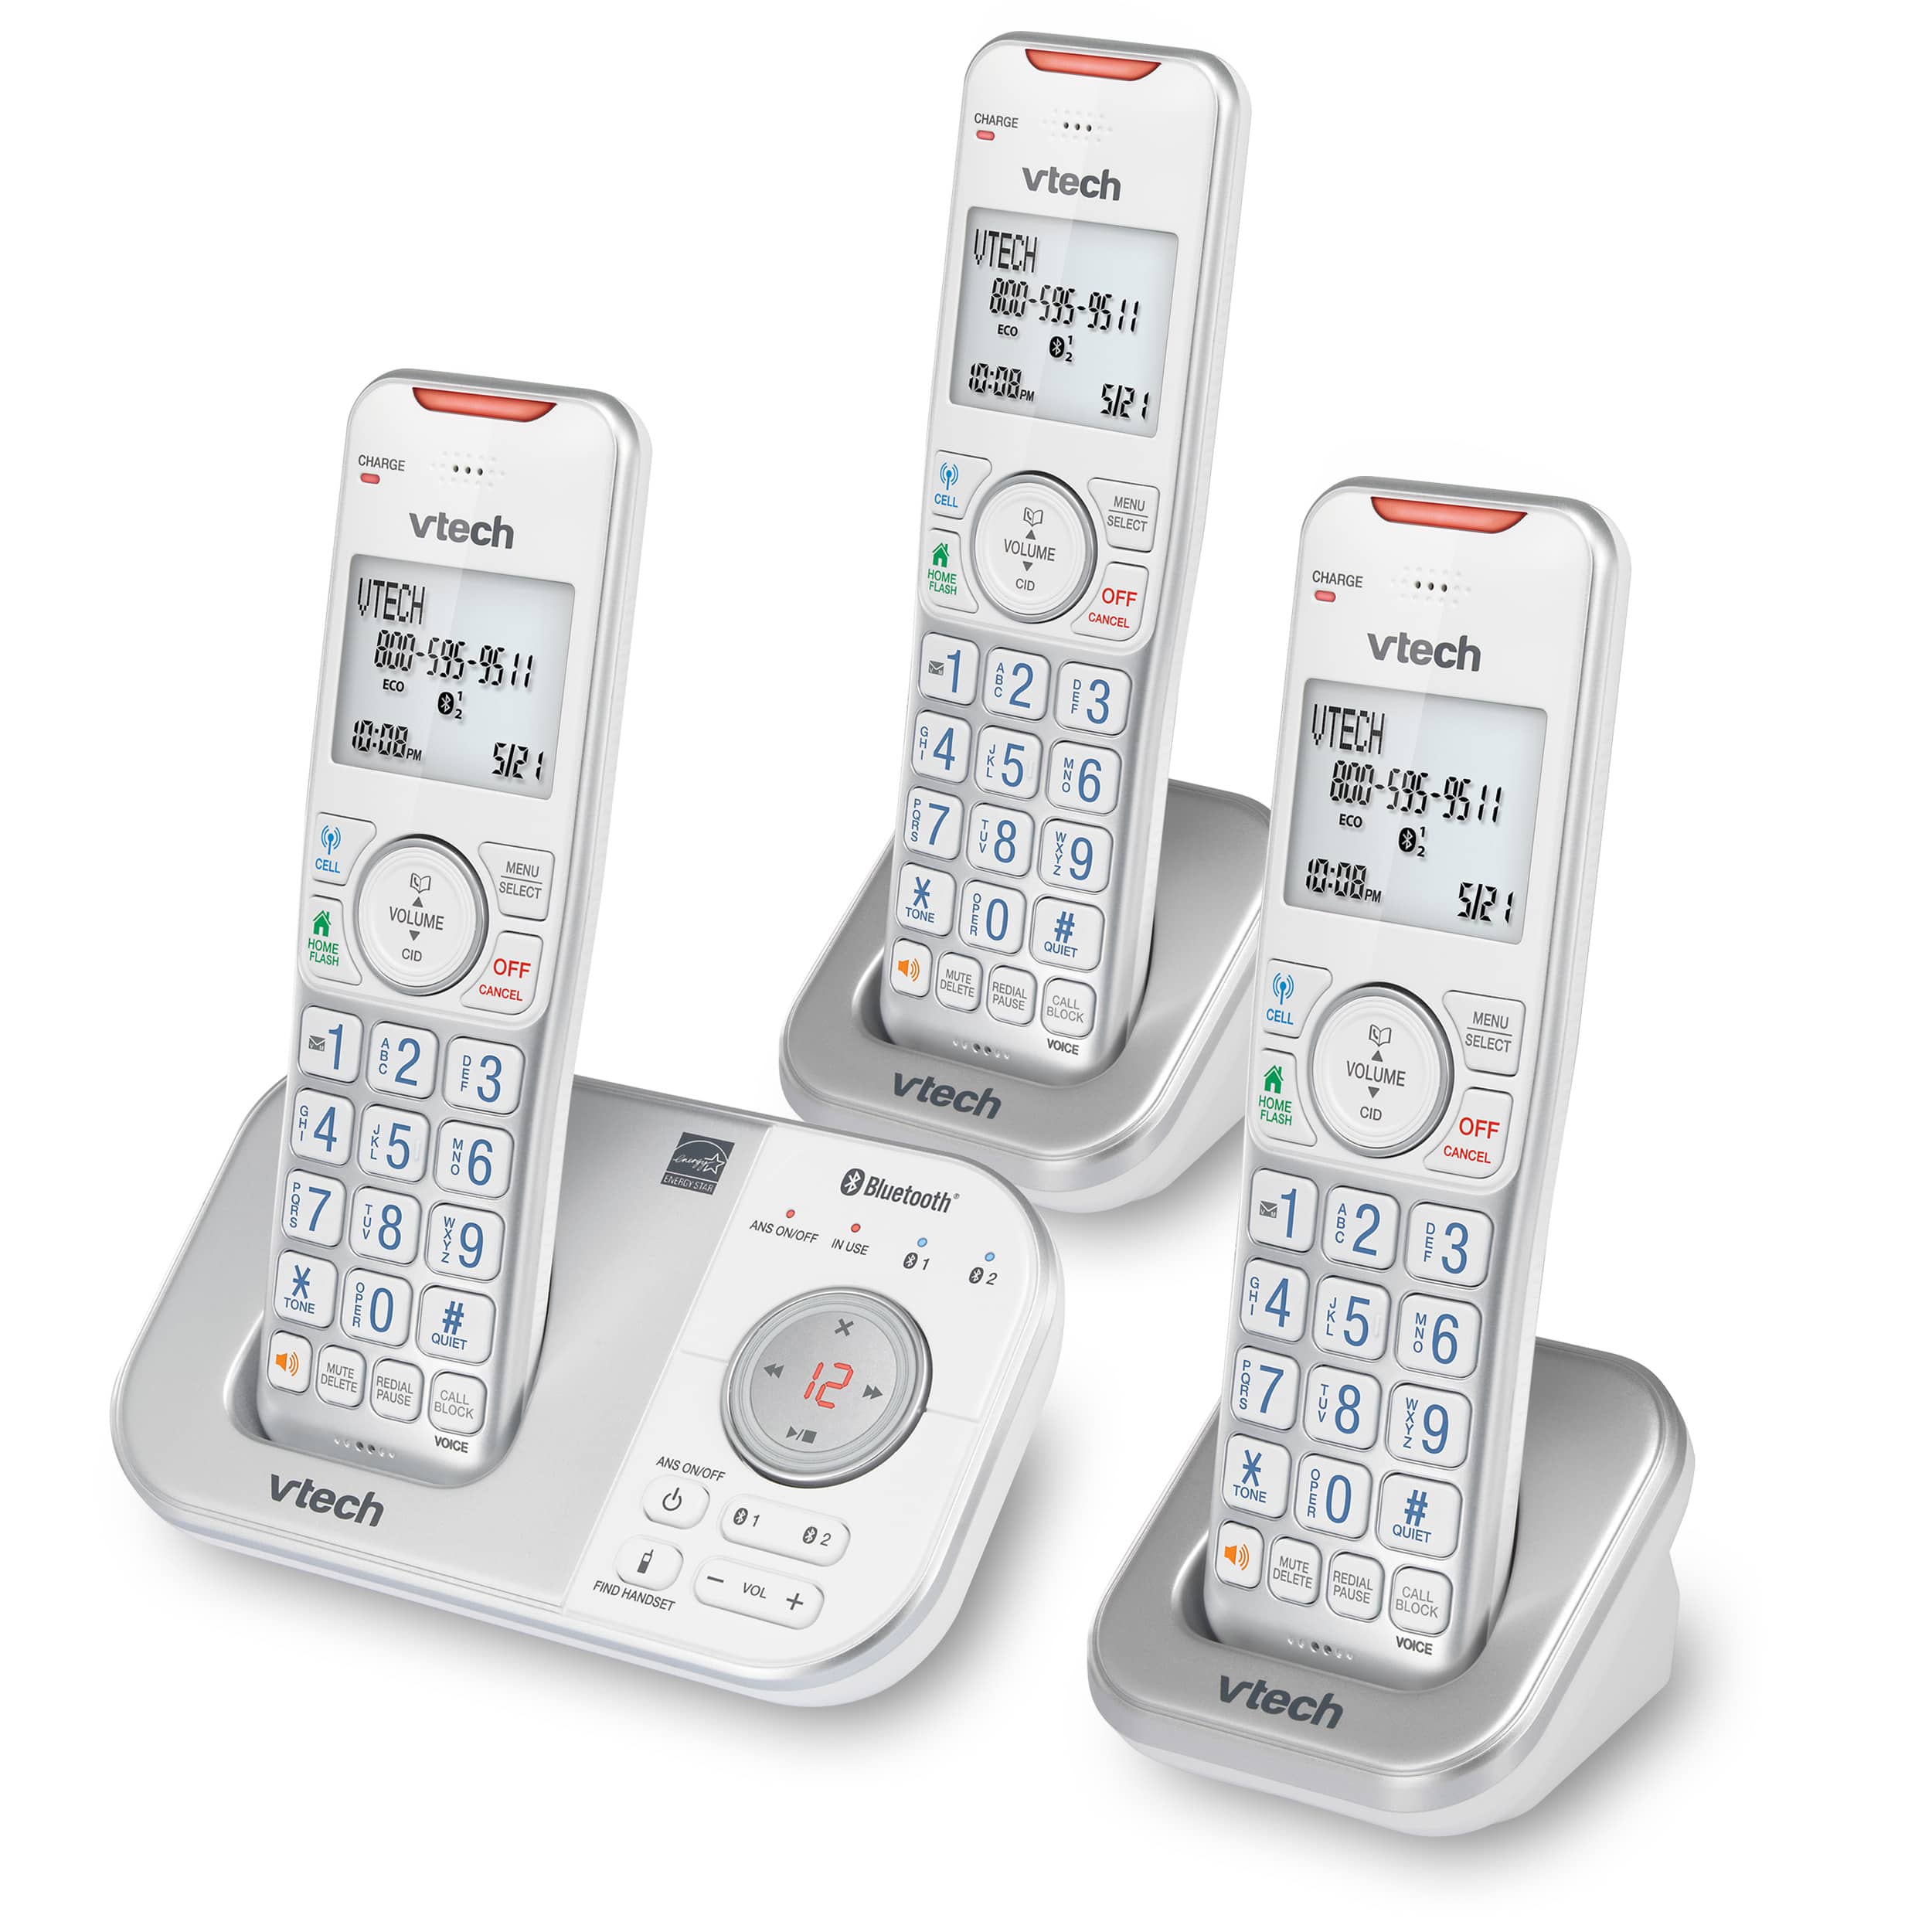 3-Handset Expandable Cordless Phone with Bluetooth Connect to Cell, Smart Call Blocker and Answering System (Silver & White) - view 2